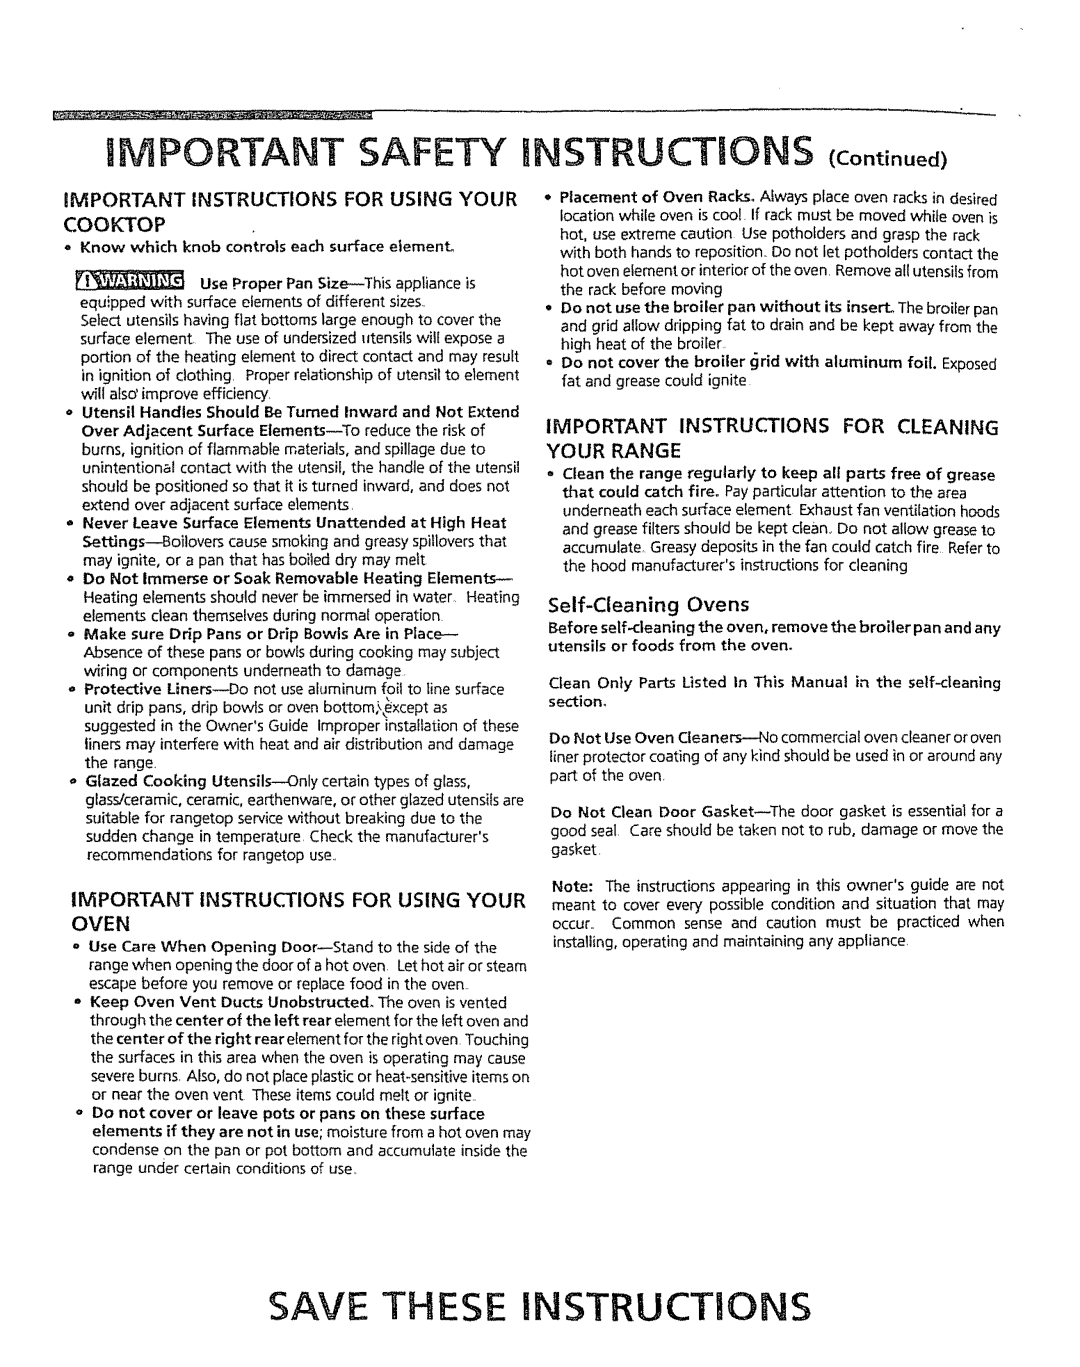 Kenmore 5303304549 manual gMPORTANT SAFETY iNSTRUCTIONS Continued, Cooktop, Important Instructions For Using Your Oven 